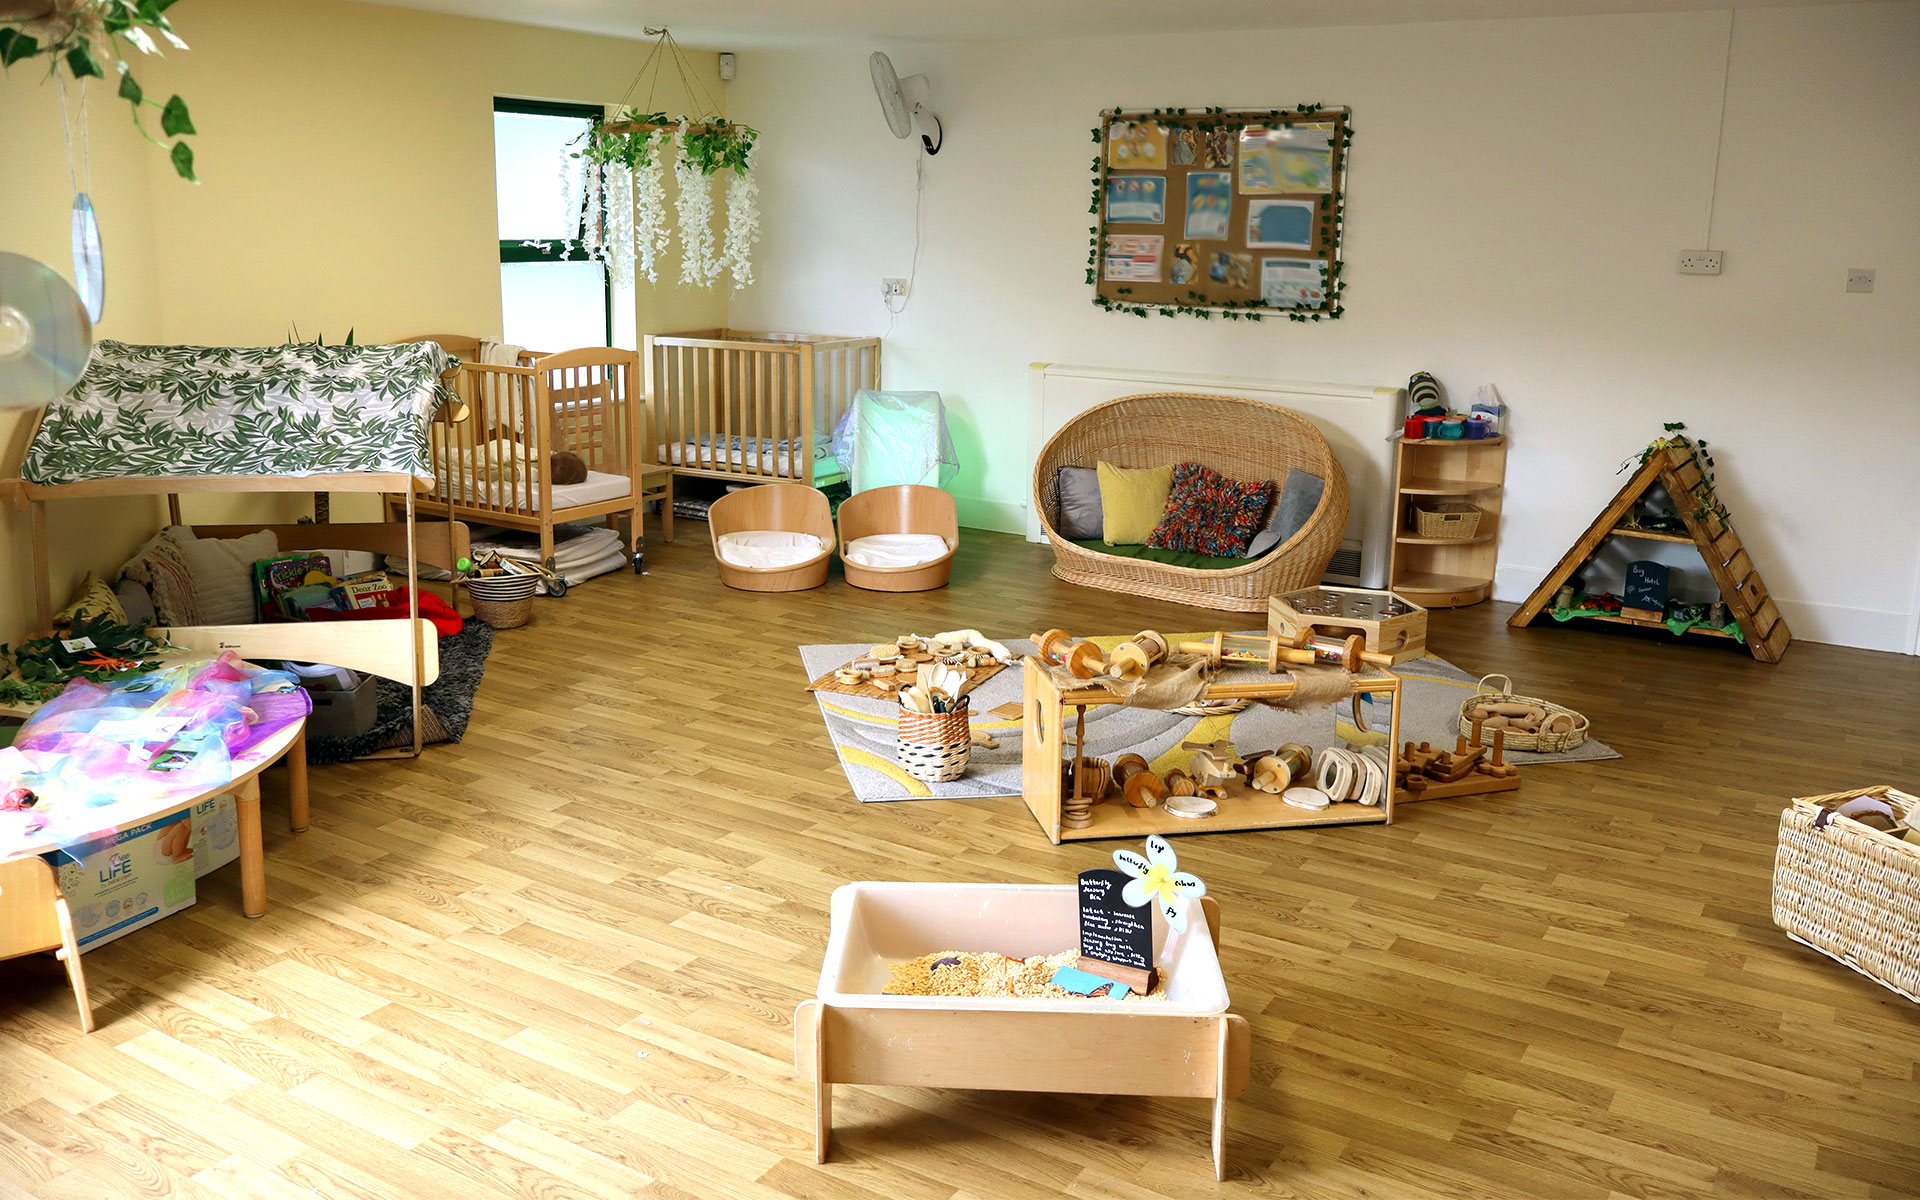 Countess of Chester Day Nursery and Preschool baby room and cribs